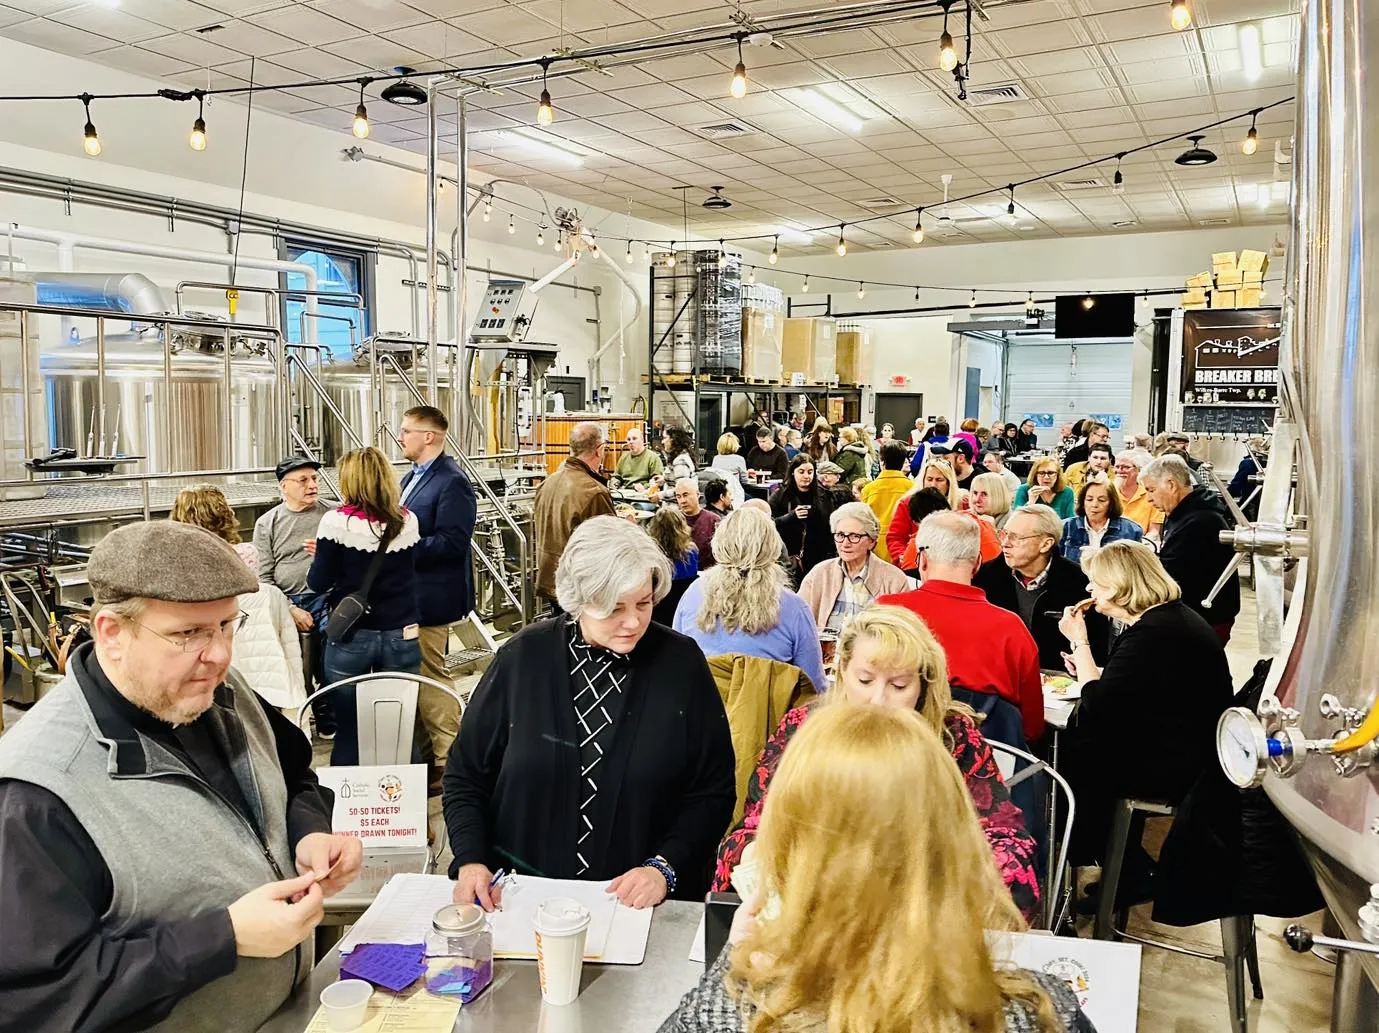 Beer lovers gather at the release of the "40 Days" beer brewed by Breaker Brewing and the Diocese of Scranton.?w=200&h=150